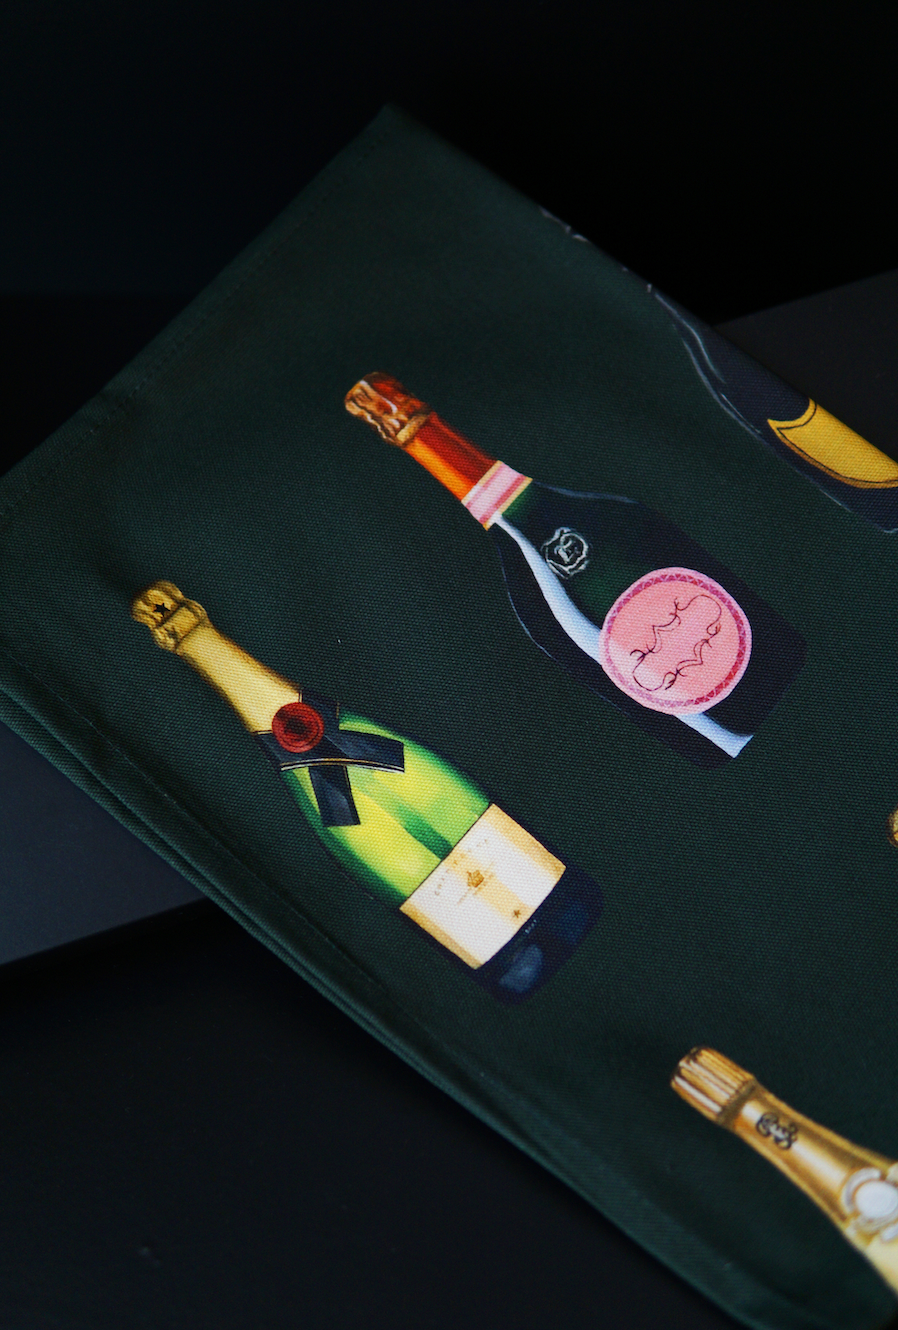 Champagne and Fizz Tea Towels